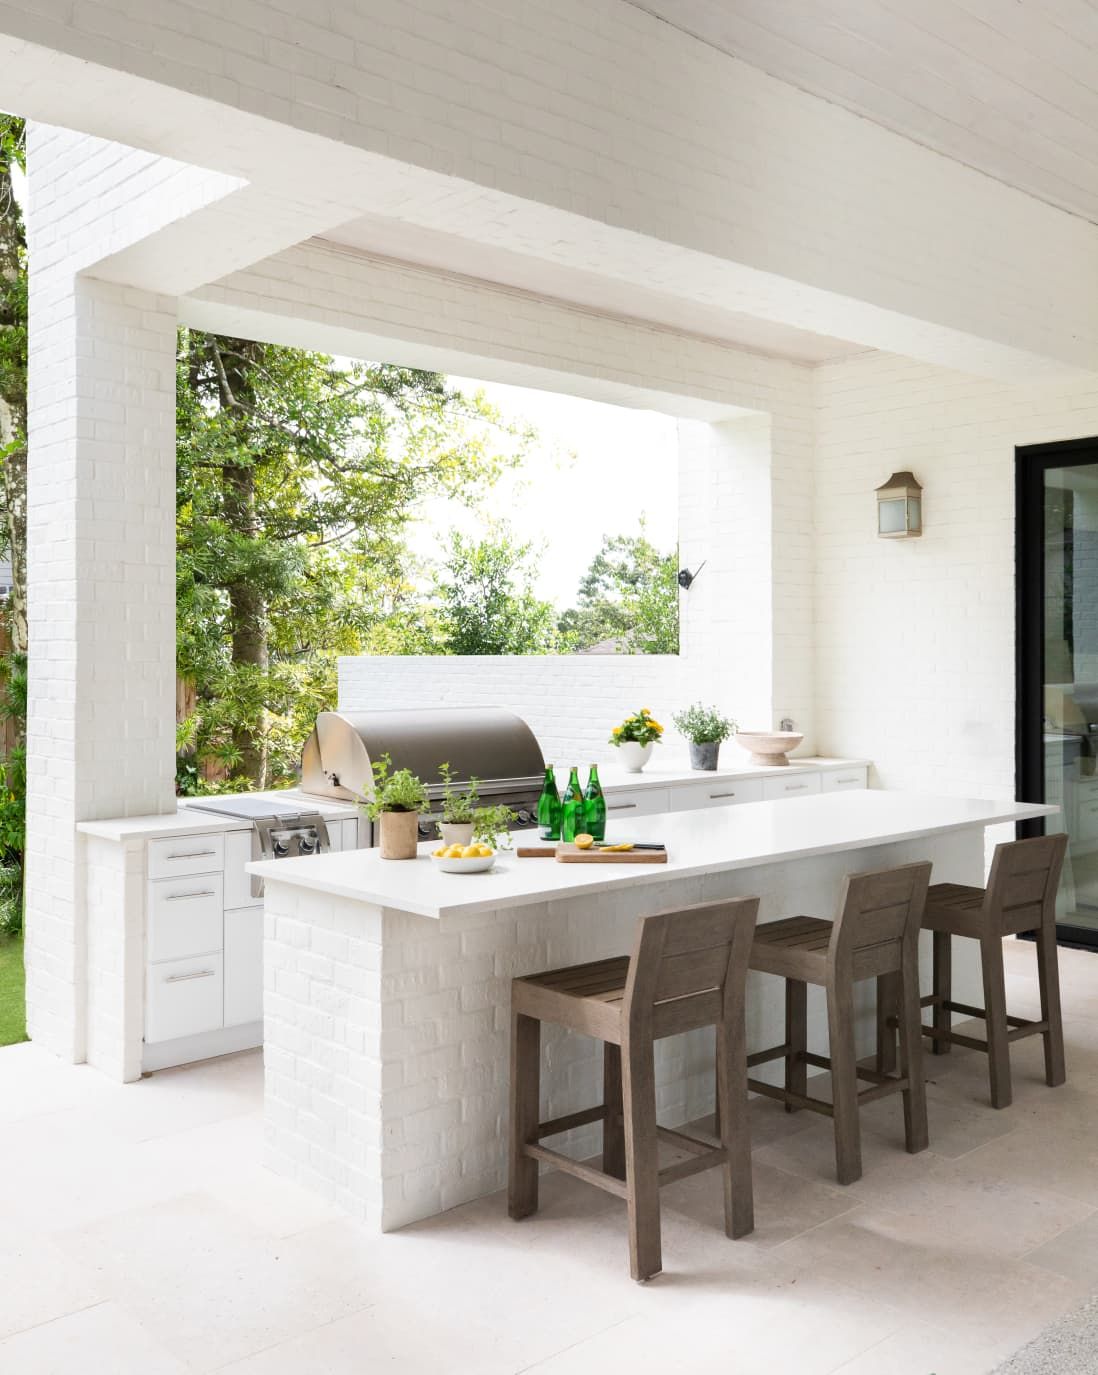 Features of outdoor kitchens